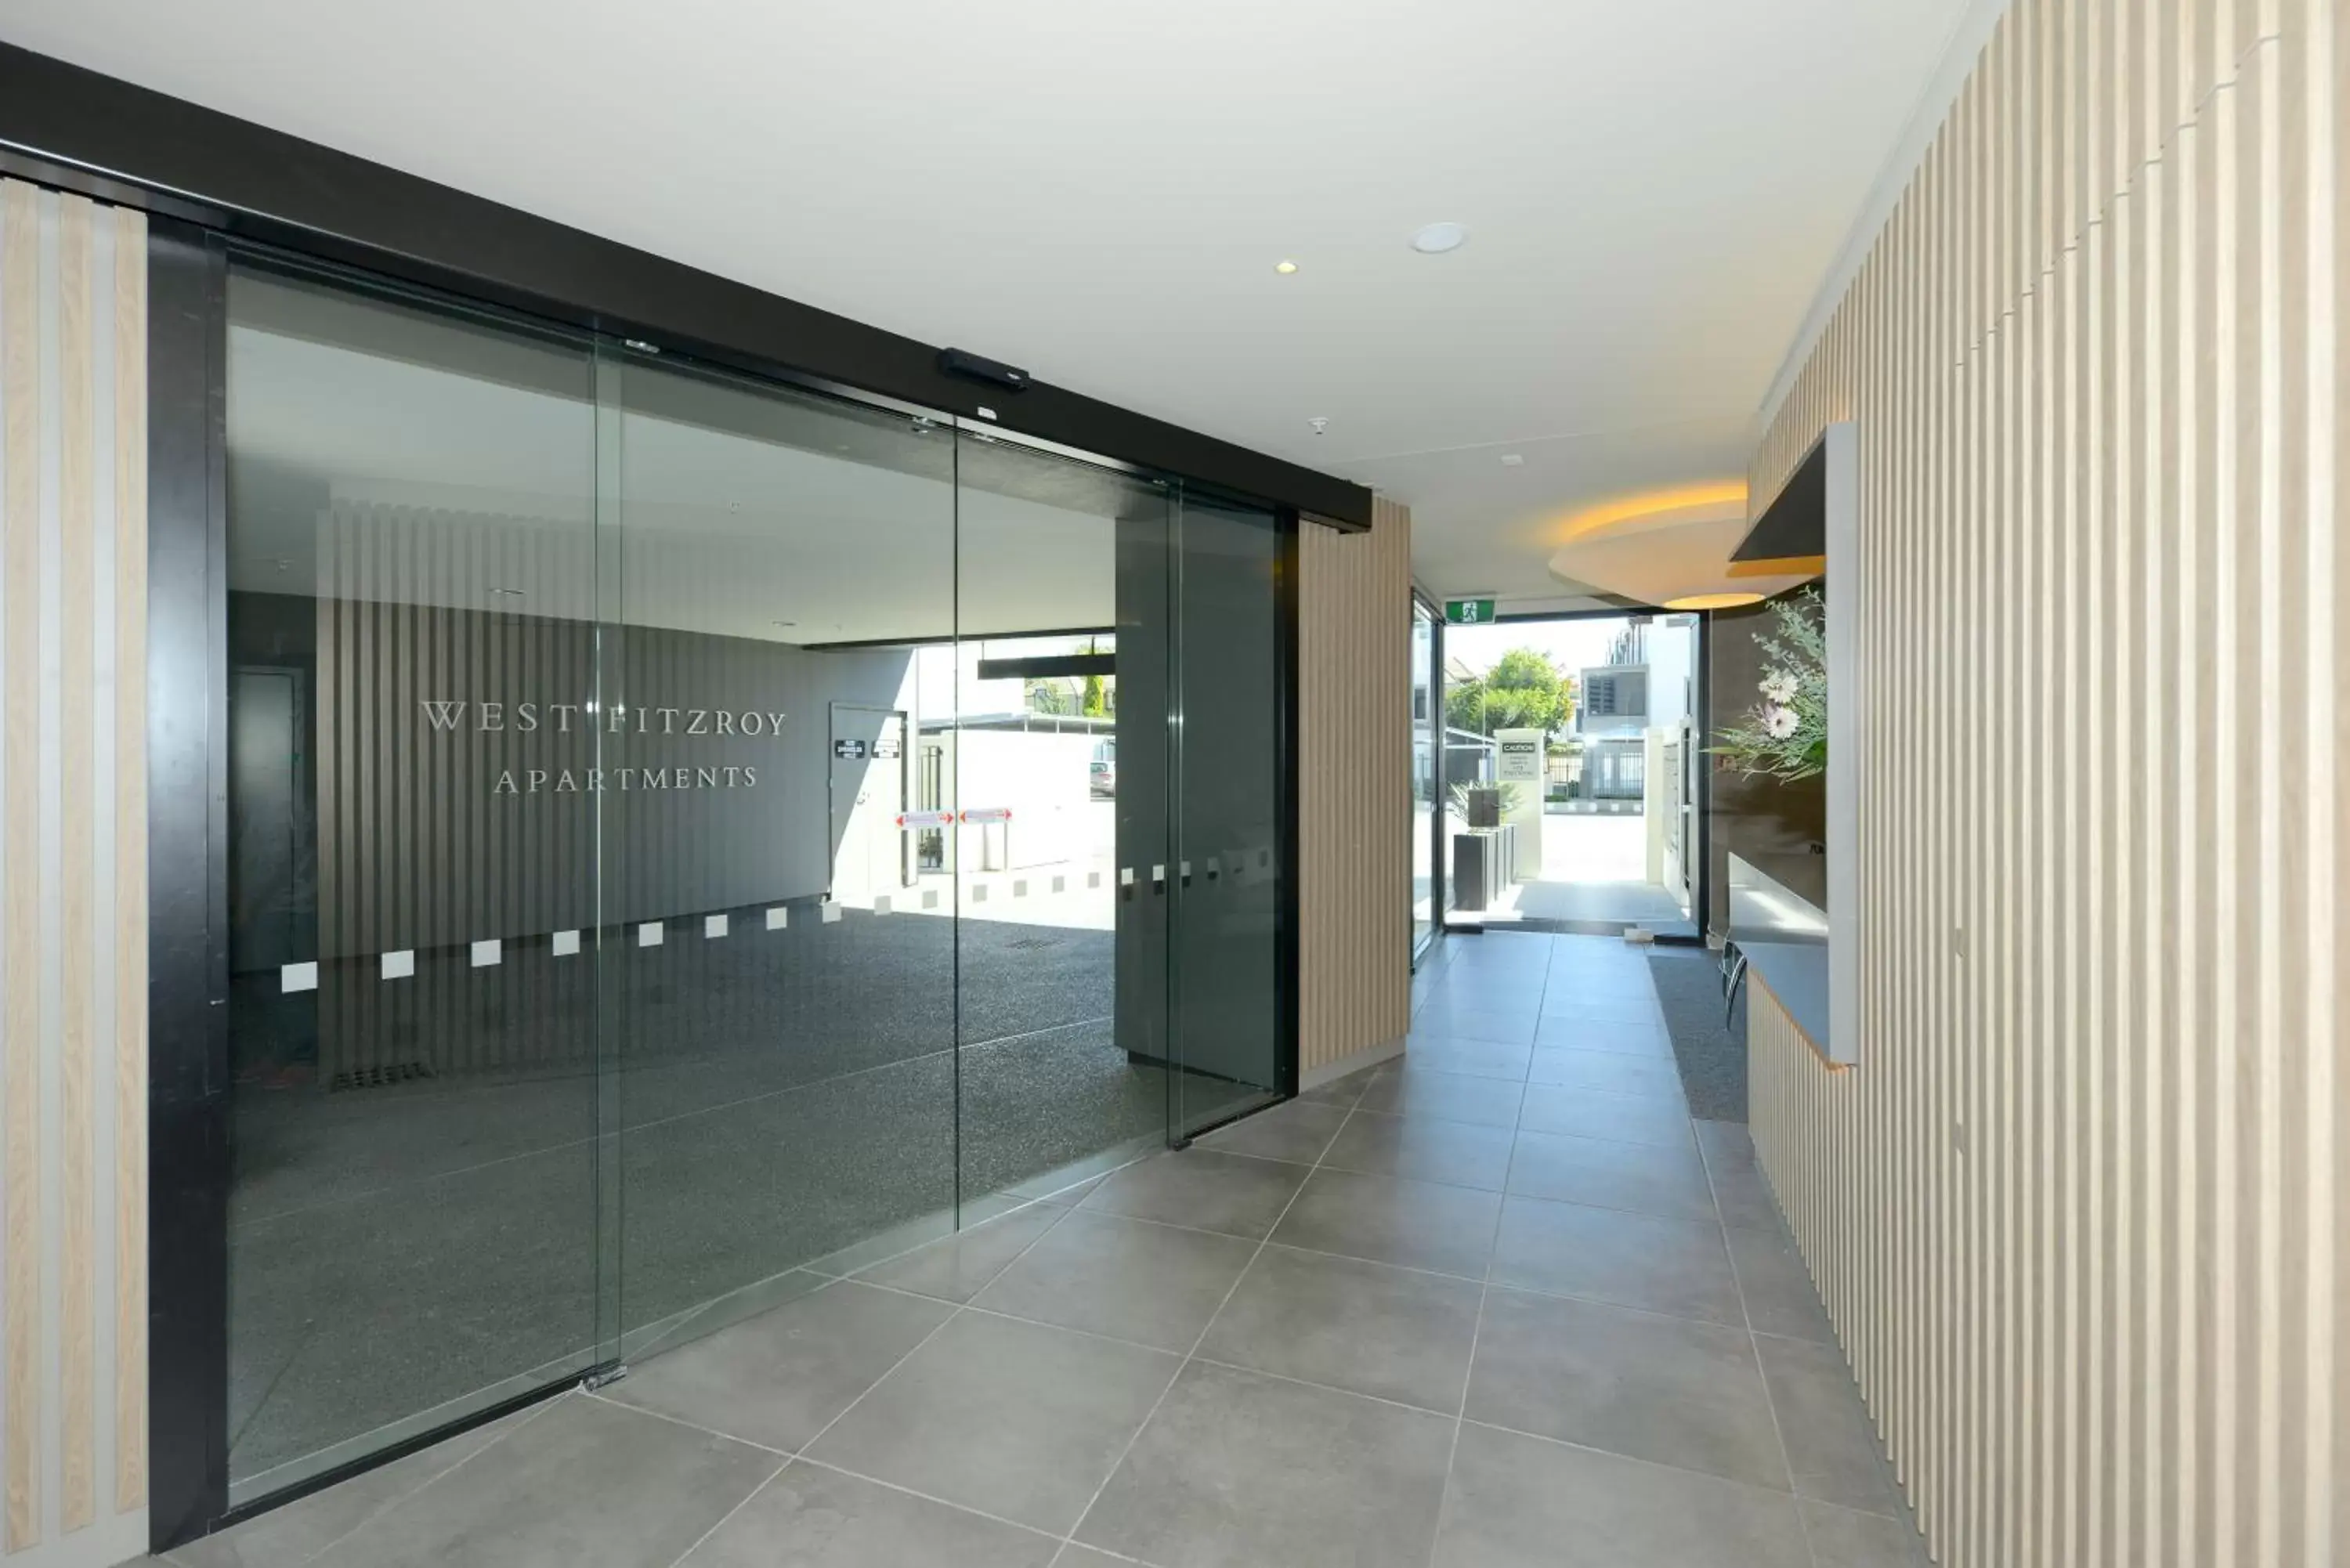 Lobby/Reception in West Fitzroy Apartments